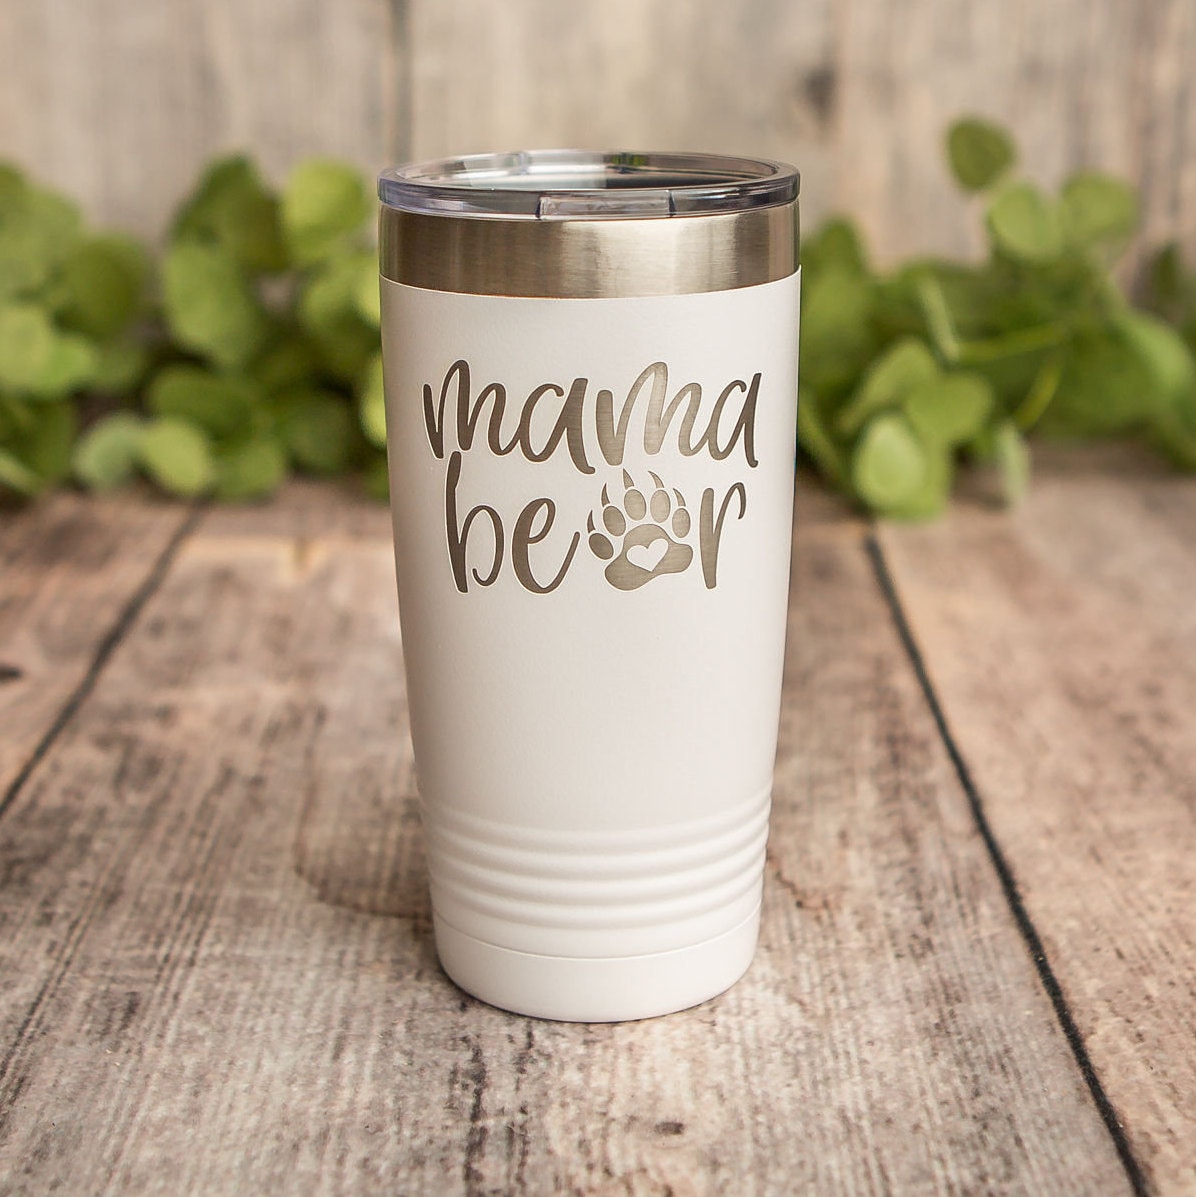 Mama Bear Coffee Mug for Mom, Mother, Wife - Cute Coffee Cups for Women -  Unique Fun Gifts for Her, Mother's Day, Christmas (Teal) 